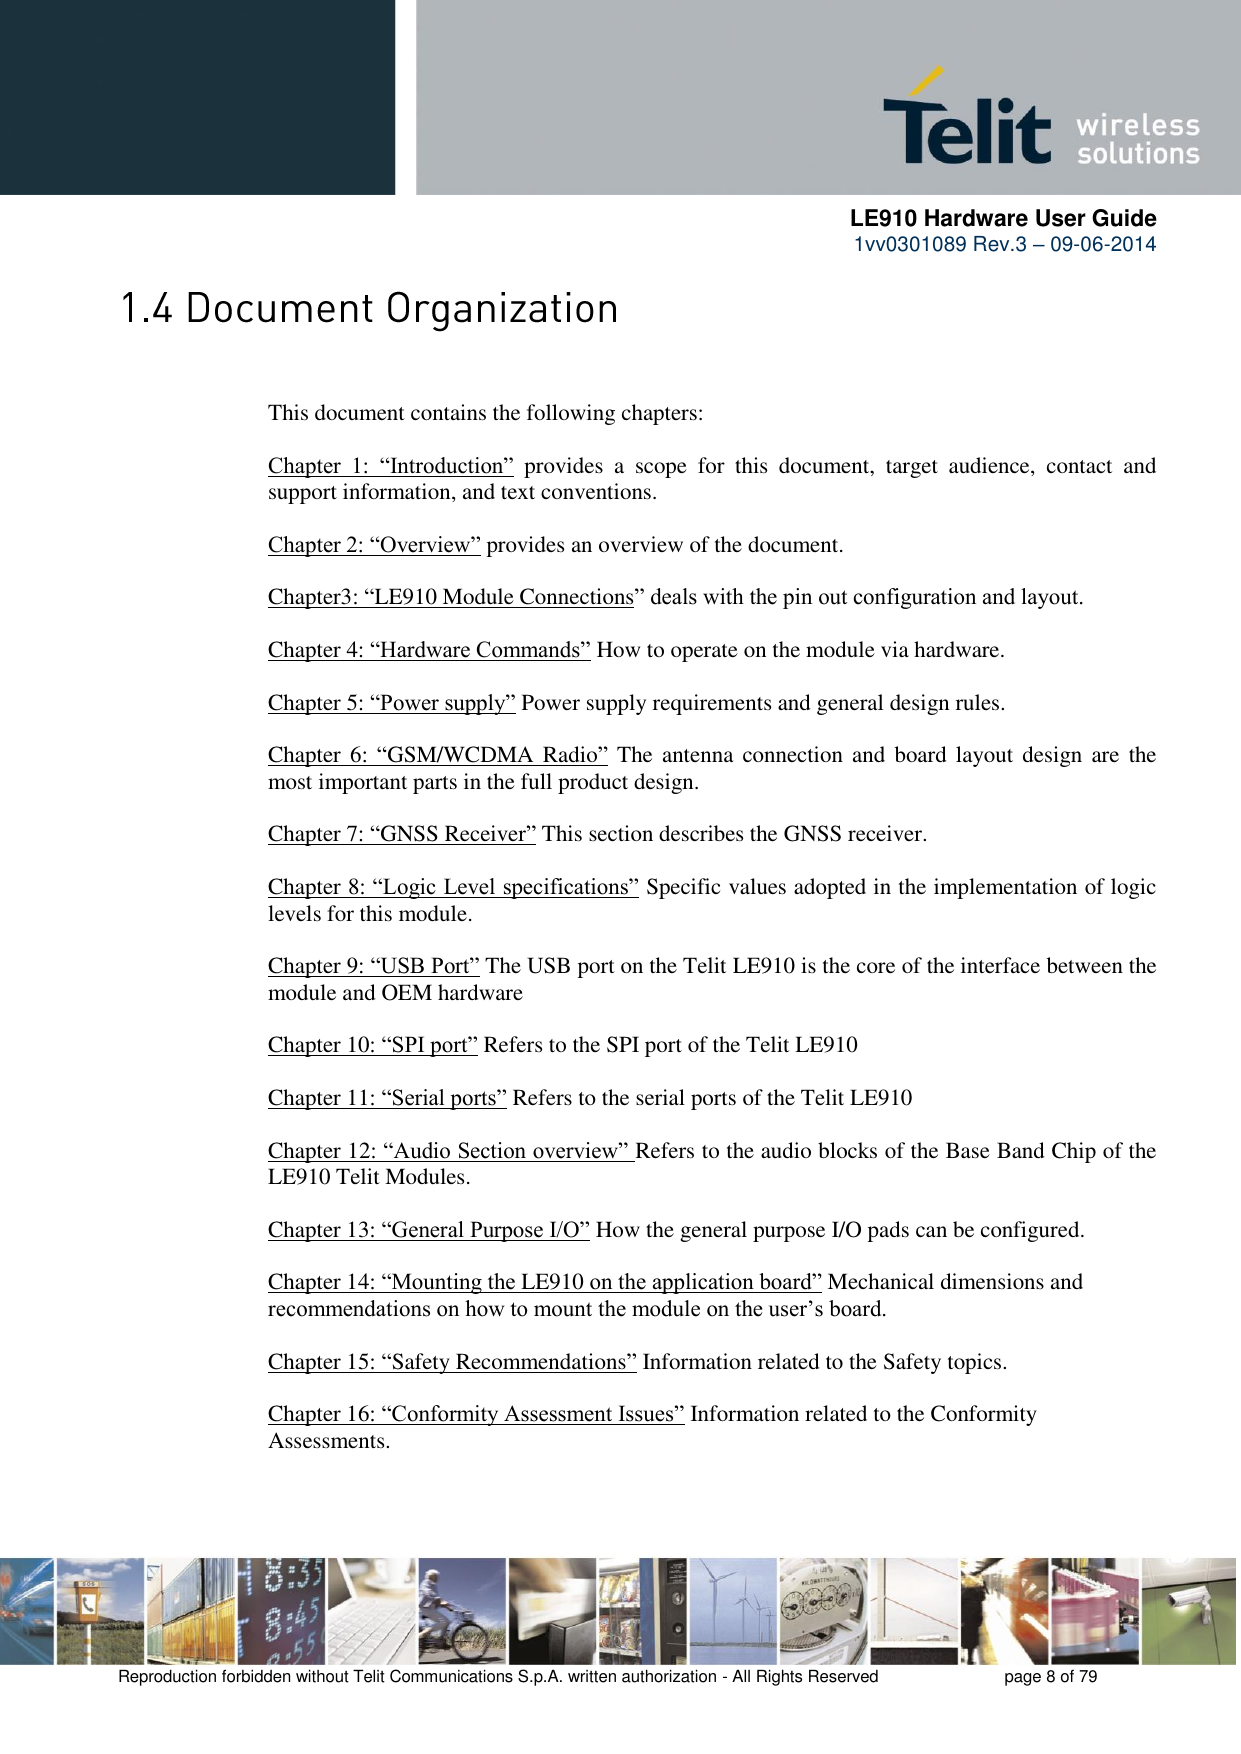      LE910 Hardware User Guide 1vv0301089 Rev.3 – 09-06-2014    Reproduction forbidden without Telit Communications S.p.A. written authorization - All Rights Reserved    page 8 of 79   This document contains the following chapters:  Chapter  1:  “Introduction”  provides  a  scope  for  this  document,  target  audience,  contact  and support information, and text conventions.  Chapter 2: “Overview” provides an overview of the document.  Chapter3: “LE910 Module Connections” deals with the pin out configuration and layout.  Chapter 4: “Hardware Commands” How to operate on the module via hardware.  Chapter 5: “Power supply” Power supply requirements and general design rules.  Chapter 6:  “GSM/WCDMA  Radio” The  antenna connection and  board layout design are  the most important parts in the full product design.  Chapter 7: “GNSS Receiver” This section describes the GNSS receiver.  Chapter 8: “Logic Level specifications” Specific values adopted in the implementation of logic levels for this module.            Chapter 9: “USB Port” The USB port on the Telit LE910 is the core of the interface between the module and OEM hardware  Chapter 10: “SPI port” Refers to the SPI port of the Telit LE910   Chapter 11: “Serial ports” Refers to the serial ports of the Telit LE910   Chapter 12: “Audio Section overview” Refers to the audio blocks of the Base Band Chip of the LE910 Telit Modules.  Chapter 13: “General Purpose I/O” How the general purpose I/O pads can be configured.  Chapter 14: “Mounting the LE910 on the application board” Mechanical dimensions and recommendations on how to mount the module on the user’s board.  Chapter 15: “Safety Recommendations” Information related to the Safety topics.  Chapter 16: “Conformity Assessment Issues” Information related to the Conformity Assessments.  